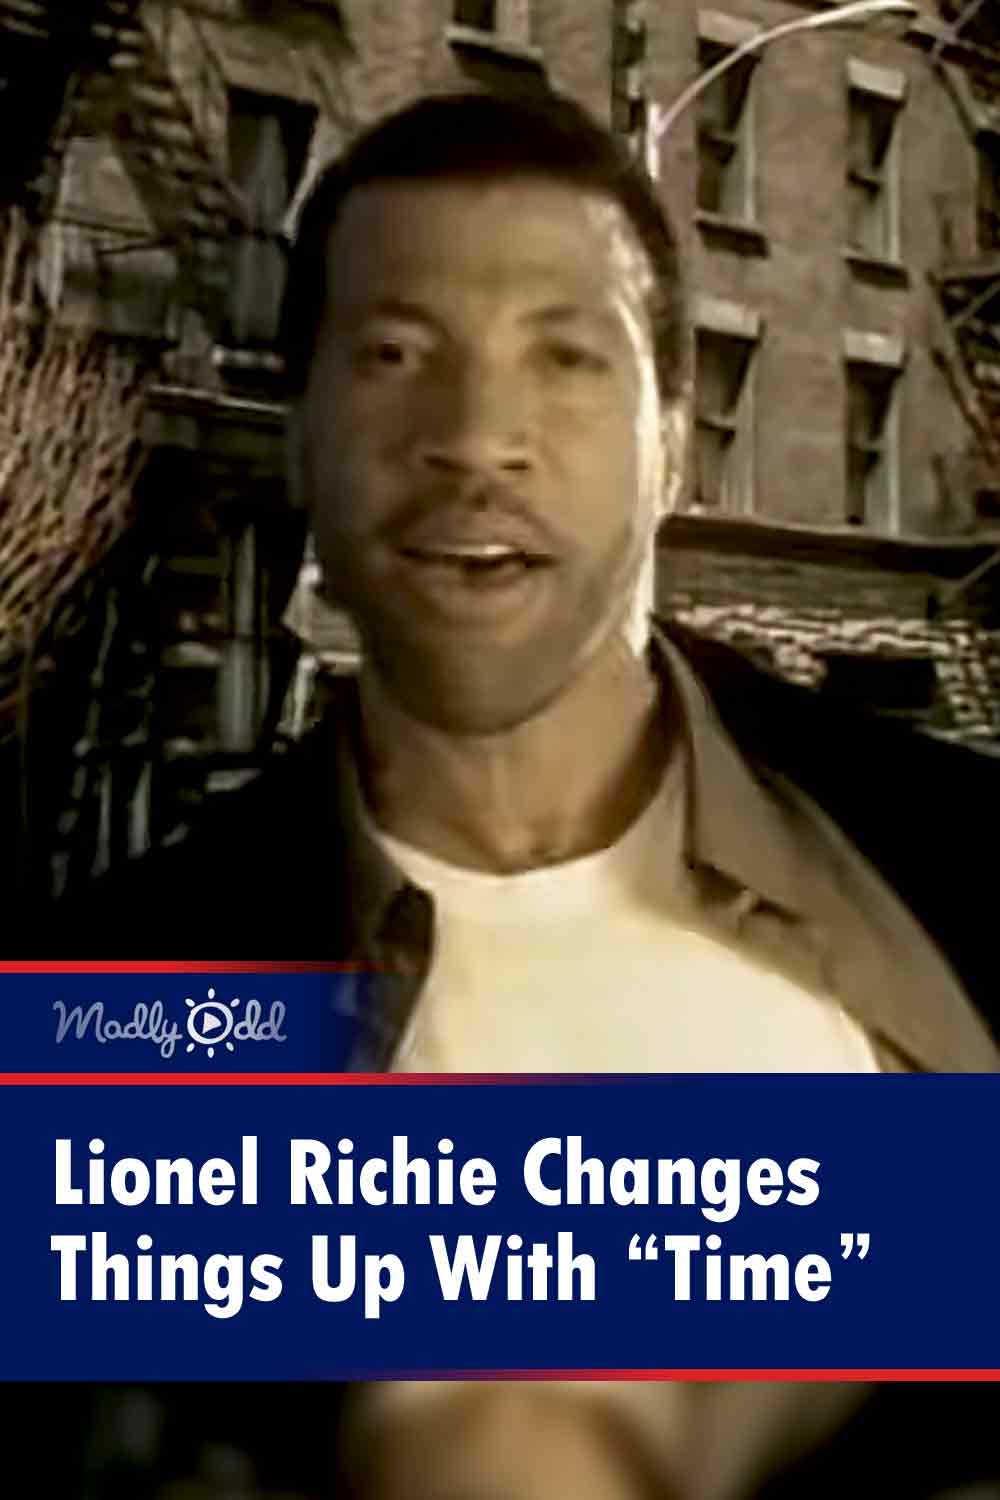 Lionel Richie Changes Things Up With “Time”